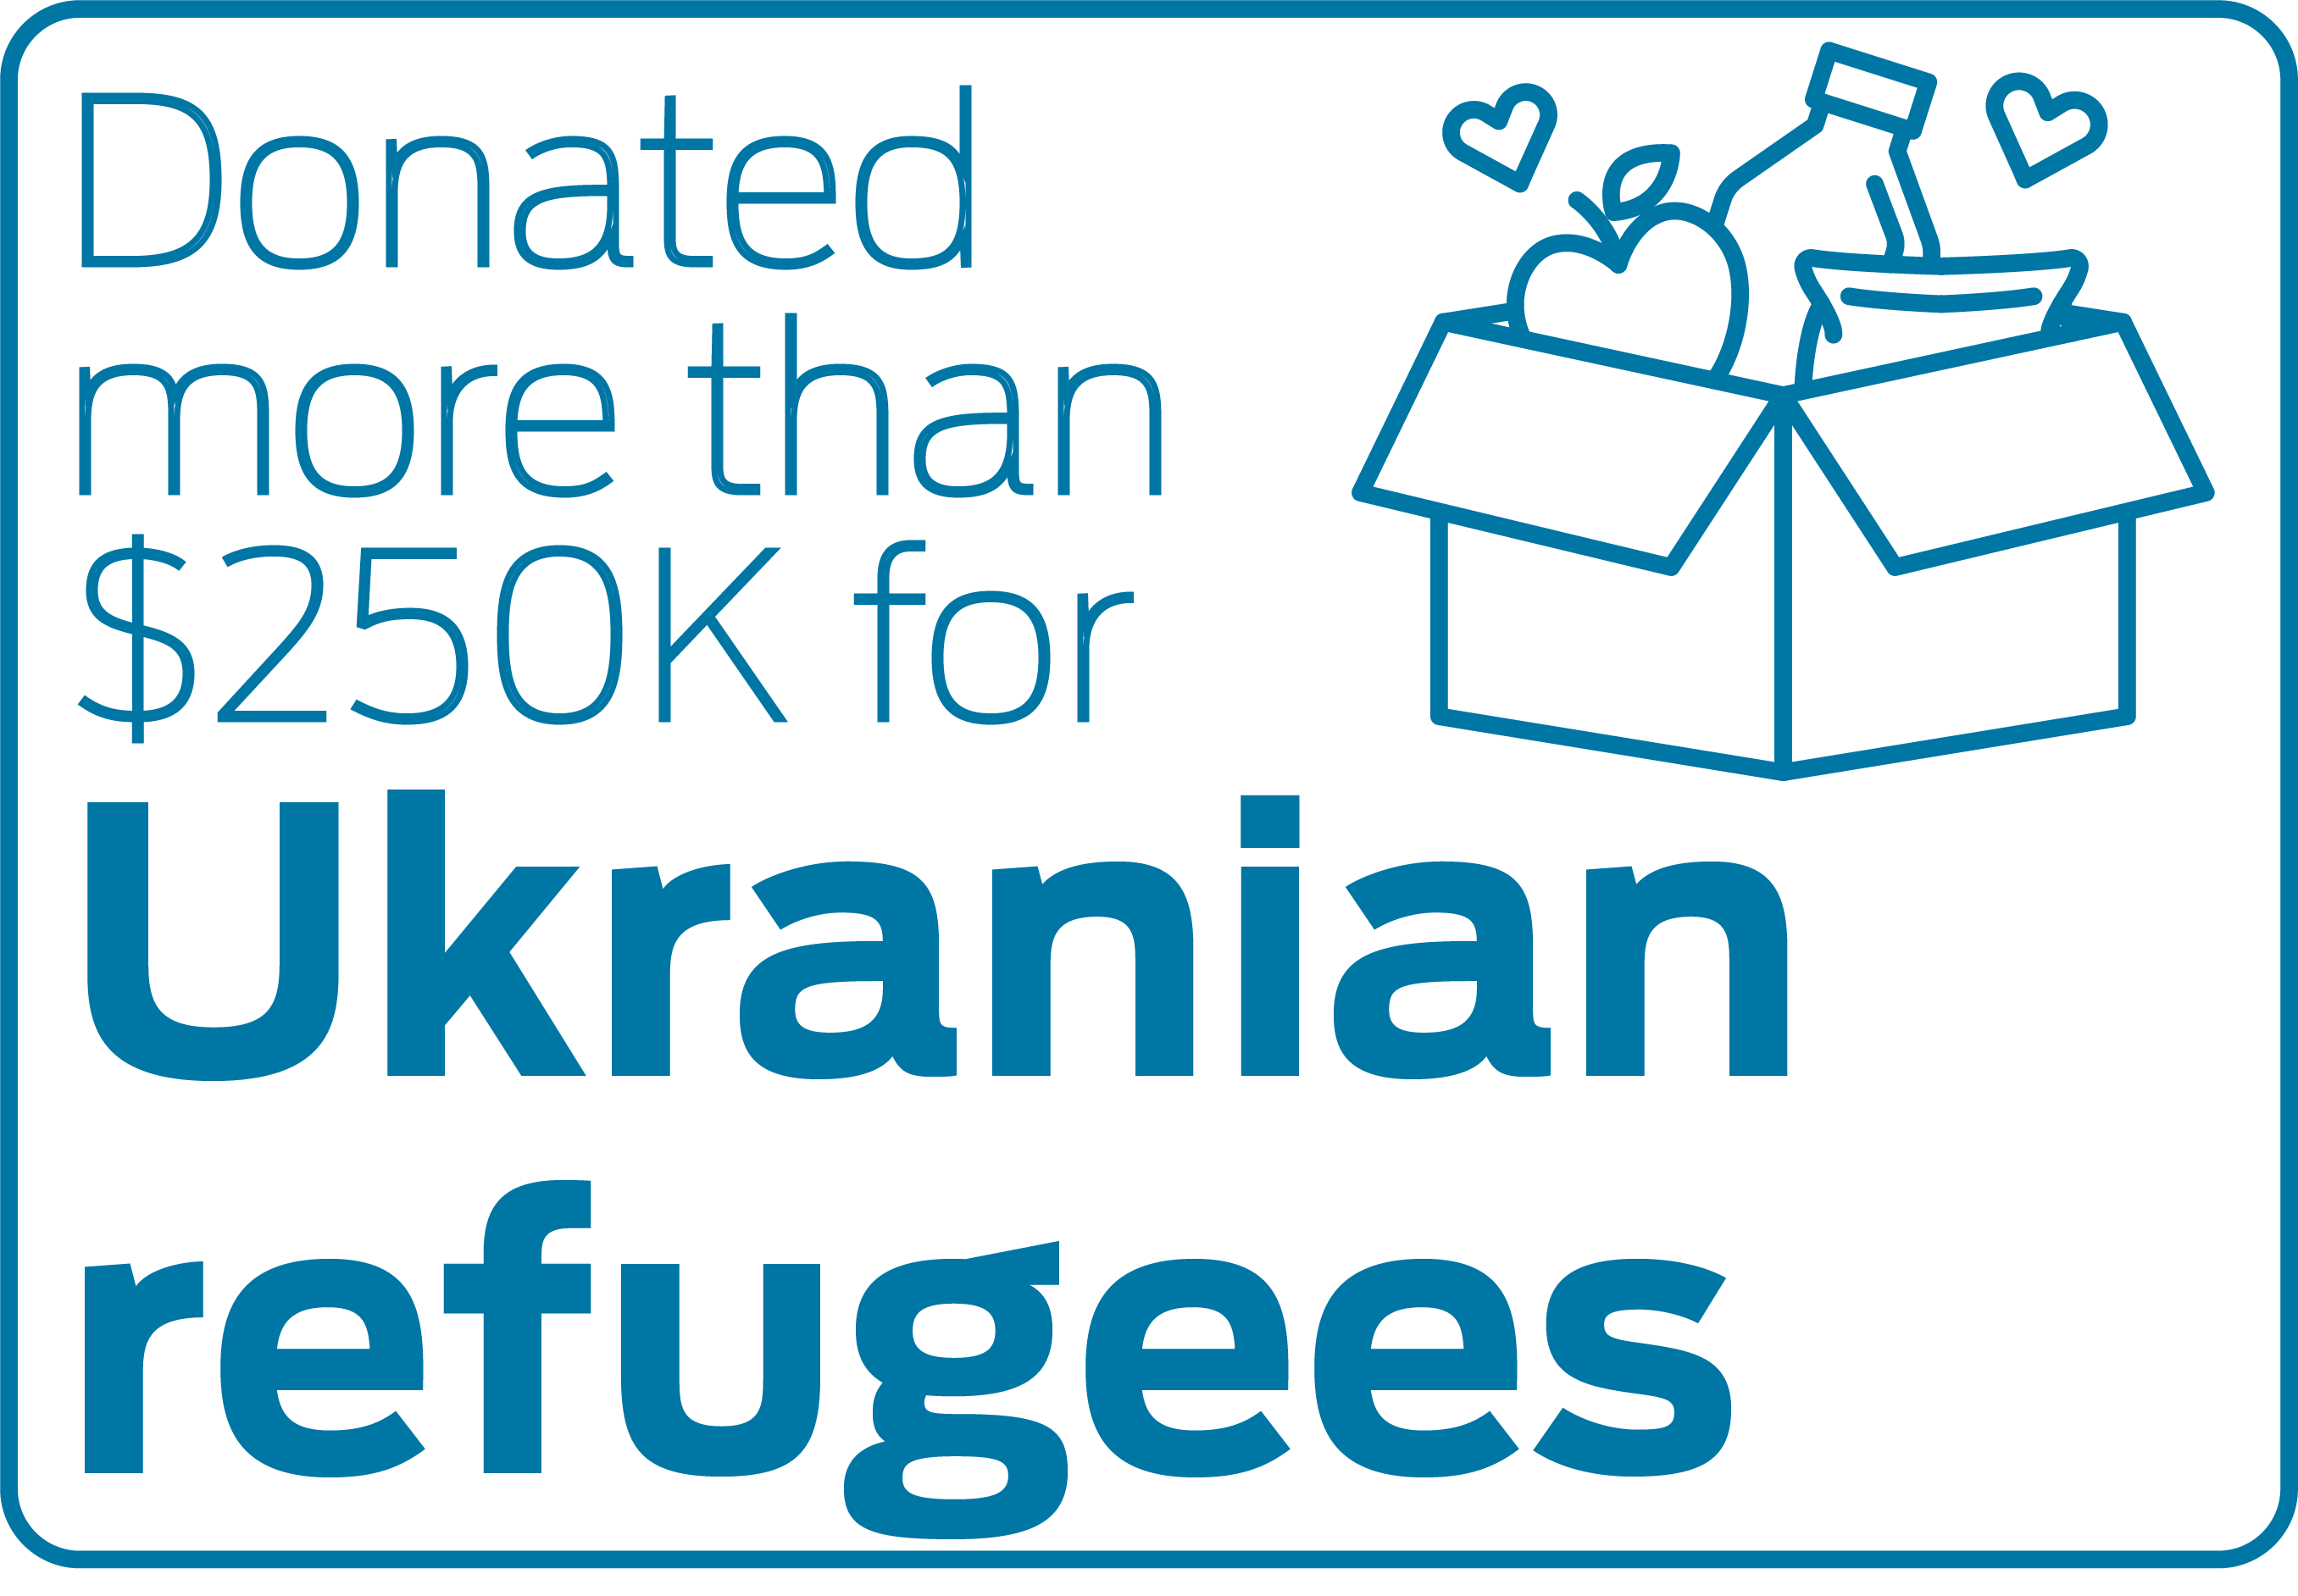 Donated more than $250K for Ukranian refugees